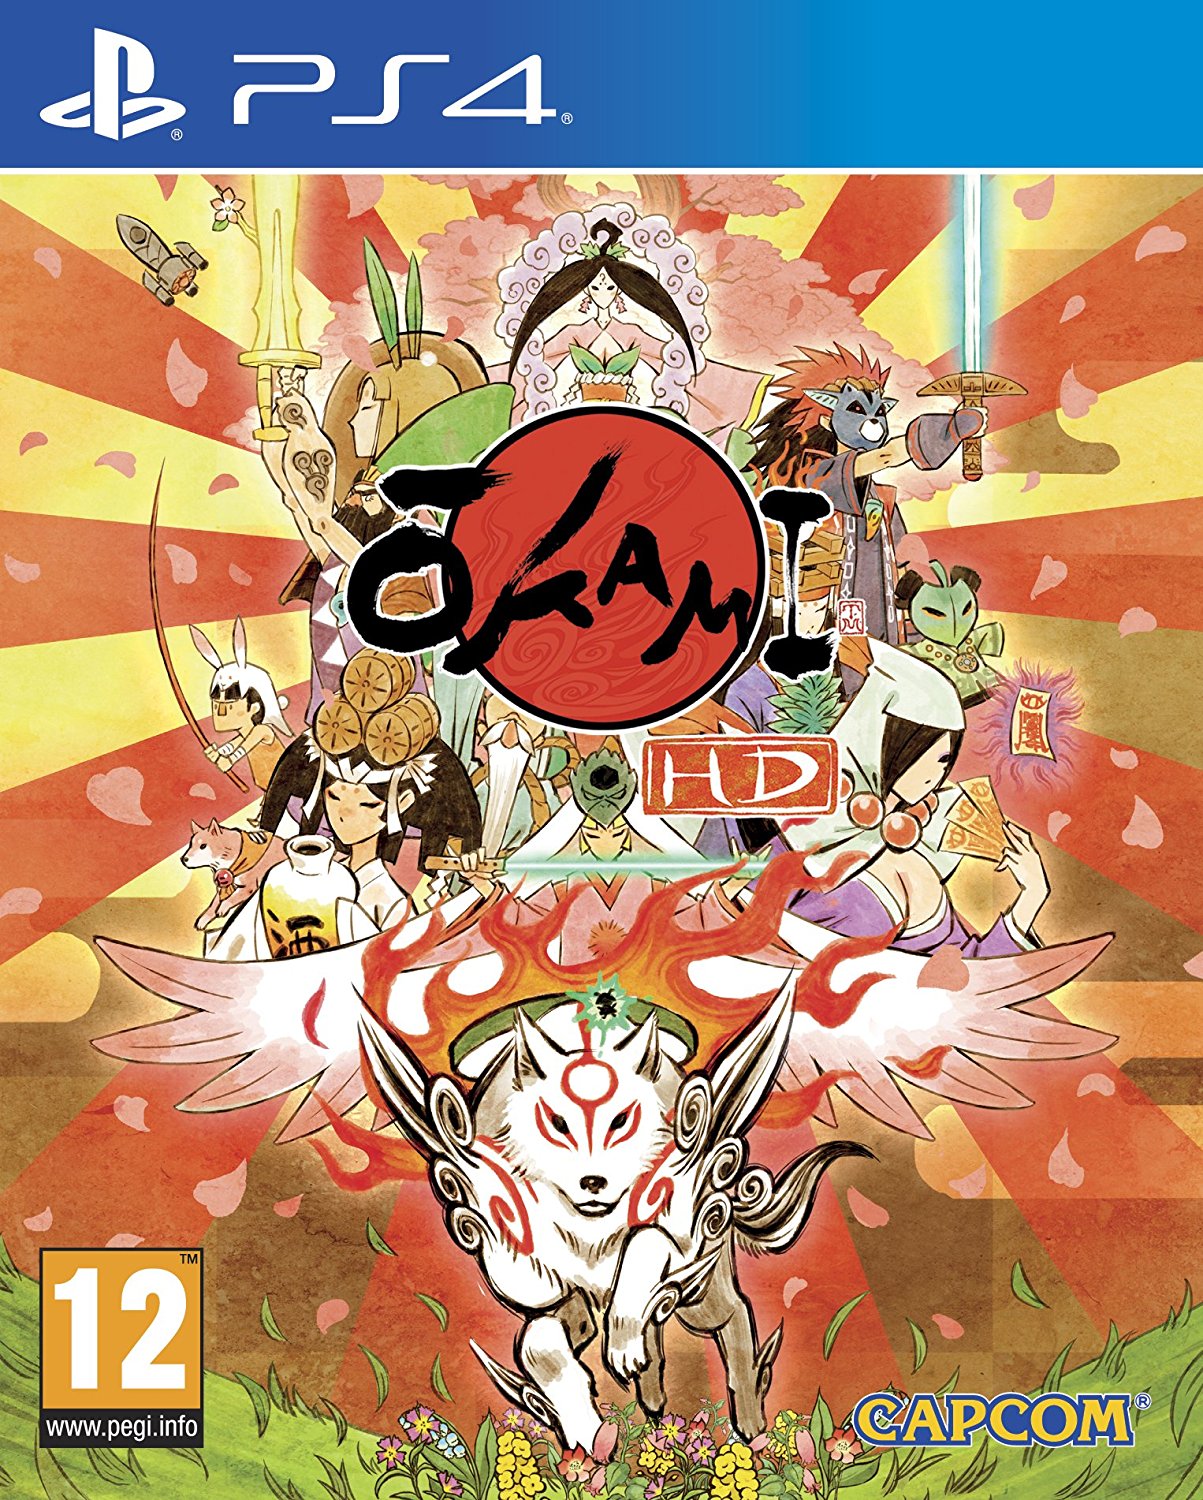 okami ps2 games on ps4 have trophies